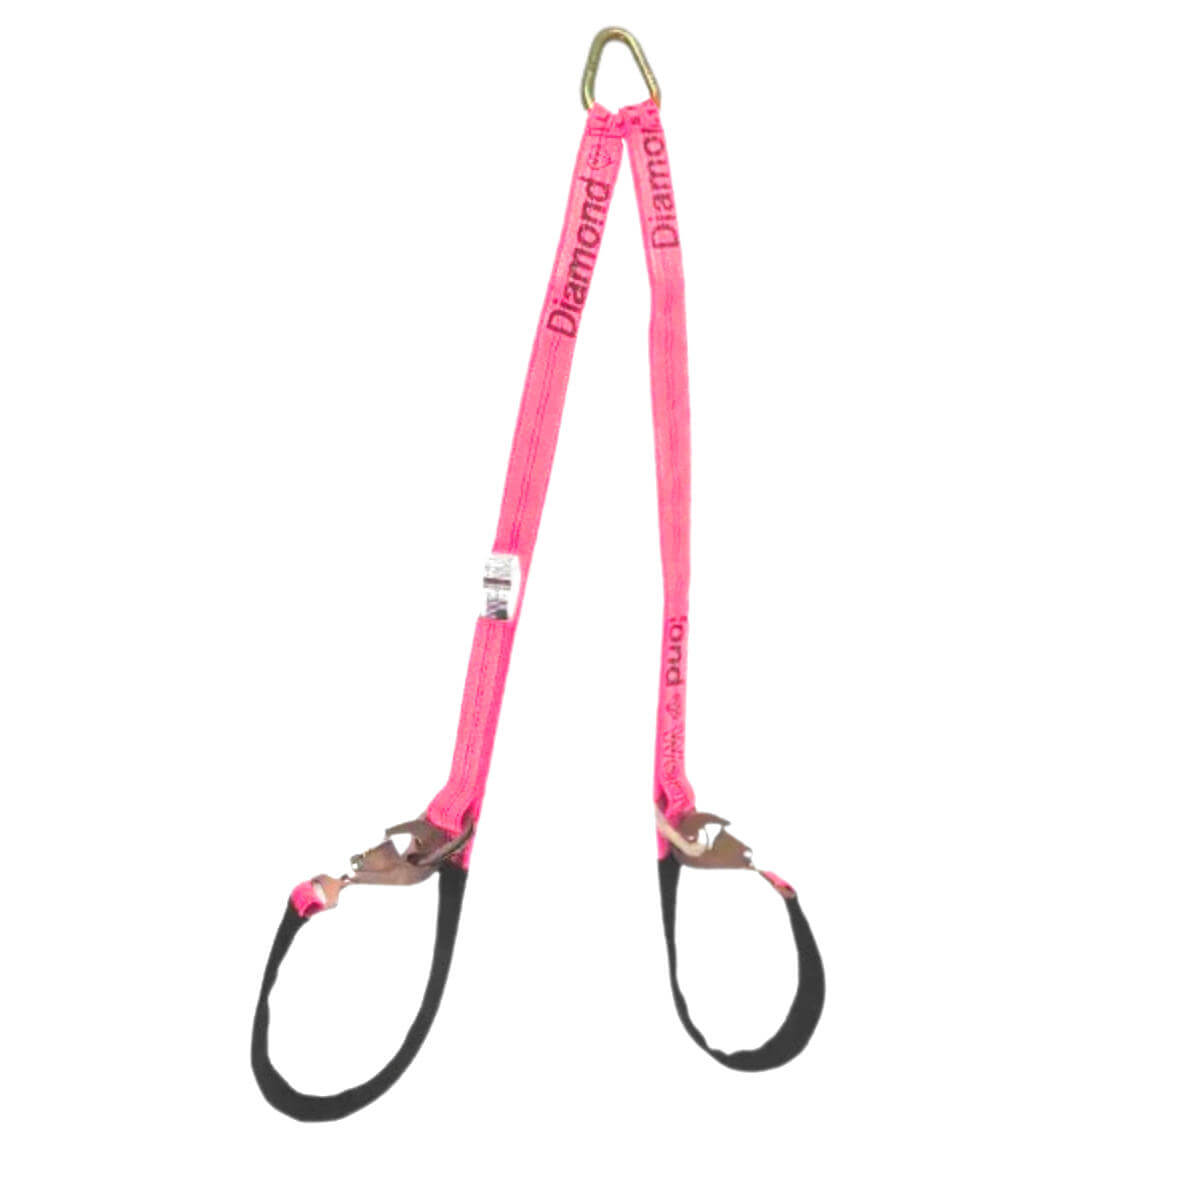 Securely tow and transport luxury vehicles with this Pink, yet tough axle v-bridle car carrier tie-down strap!